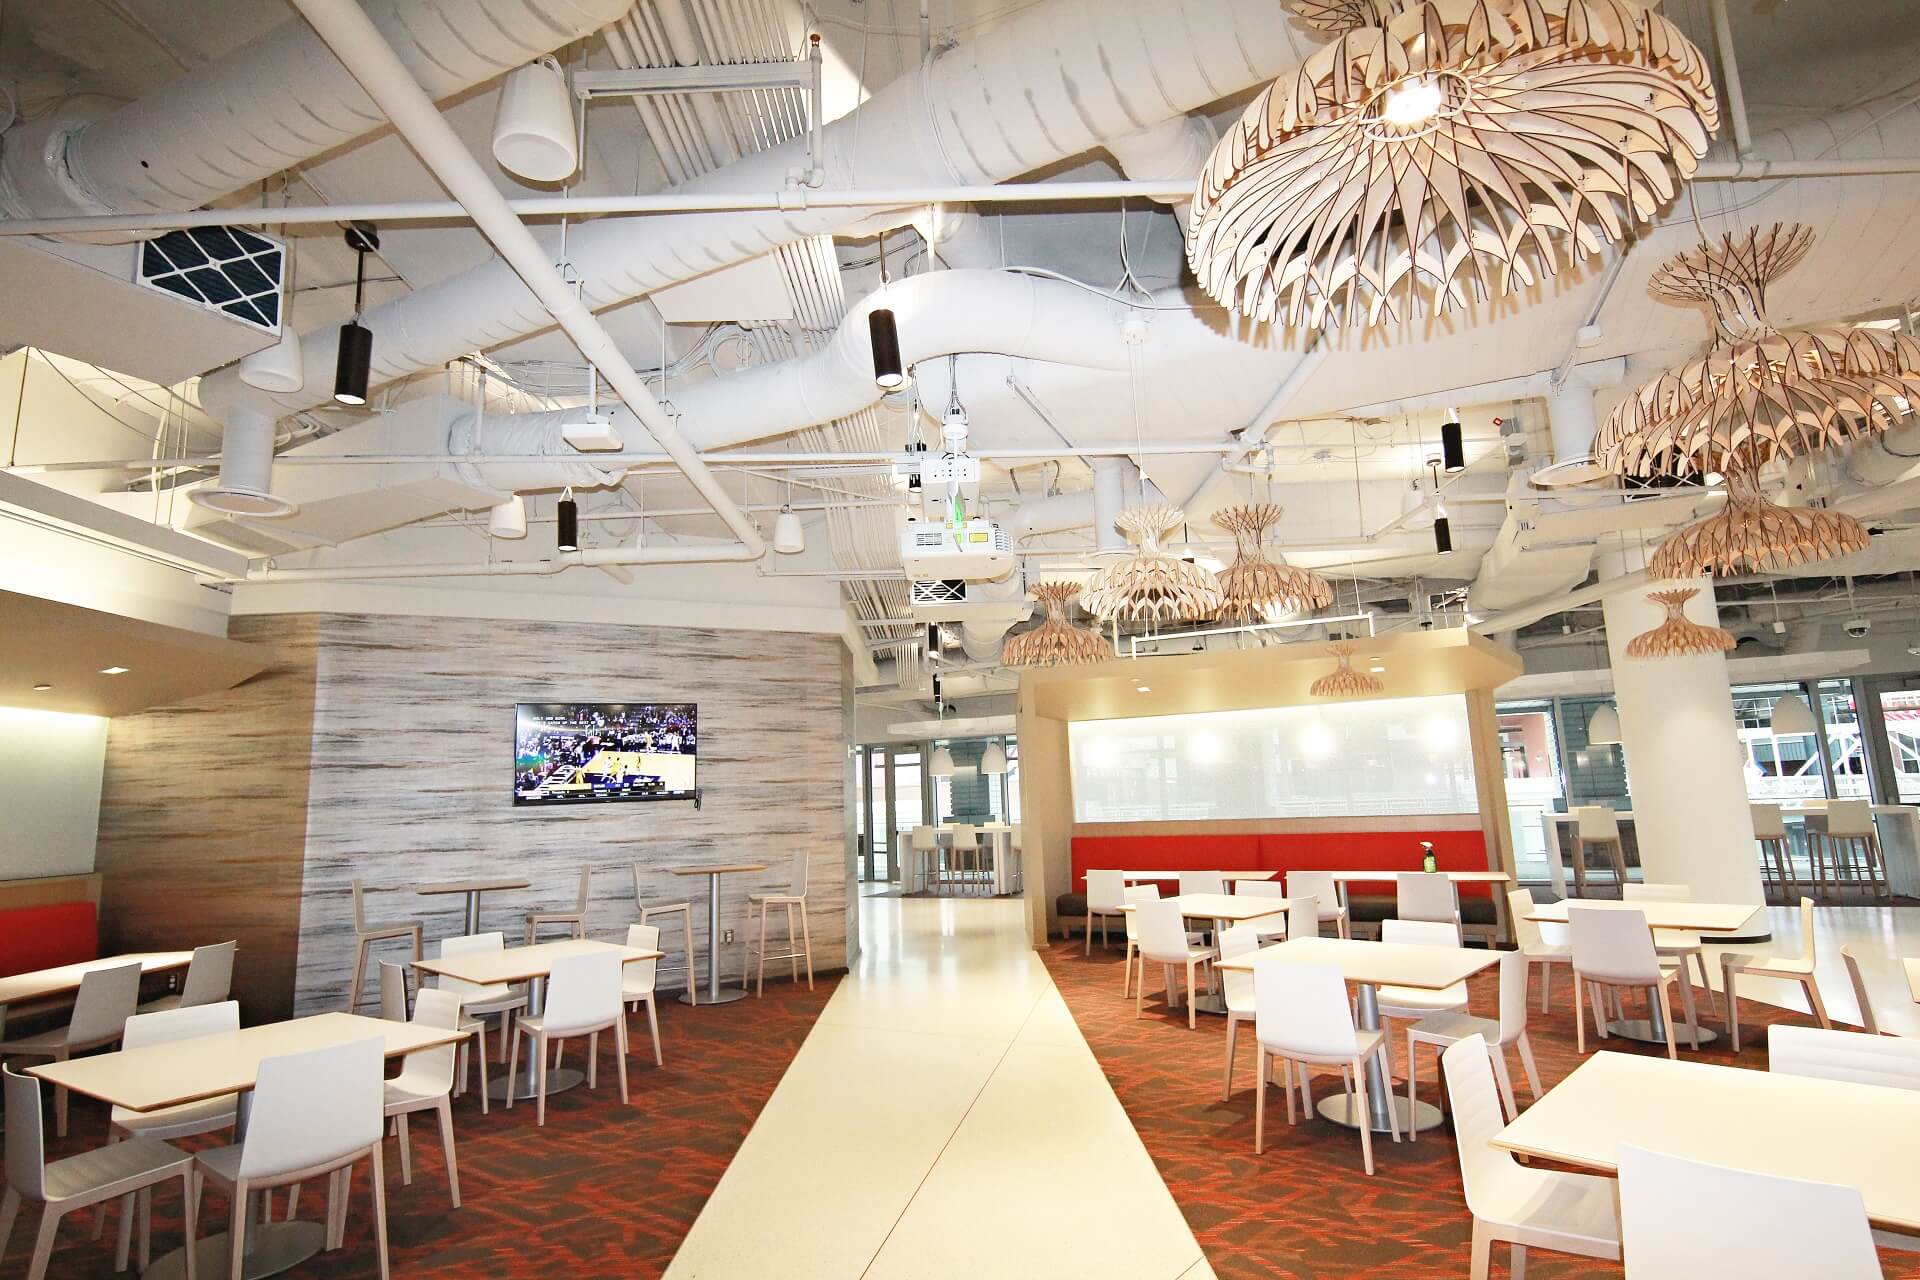 Complex ceiling and lighting work at Comcast Cable Communication offices in Atlanta, GA